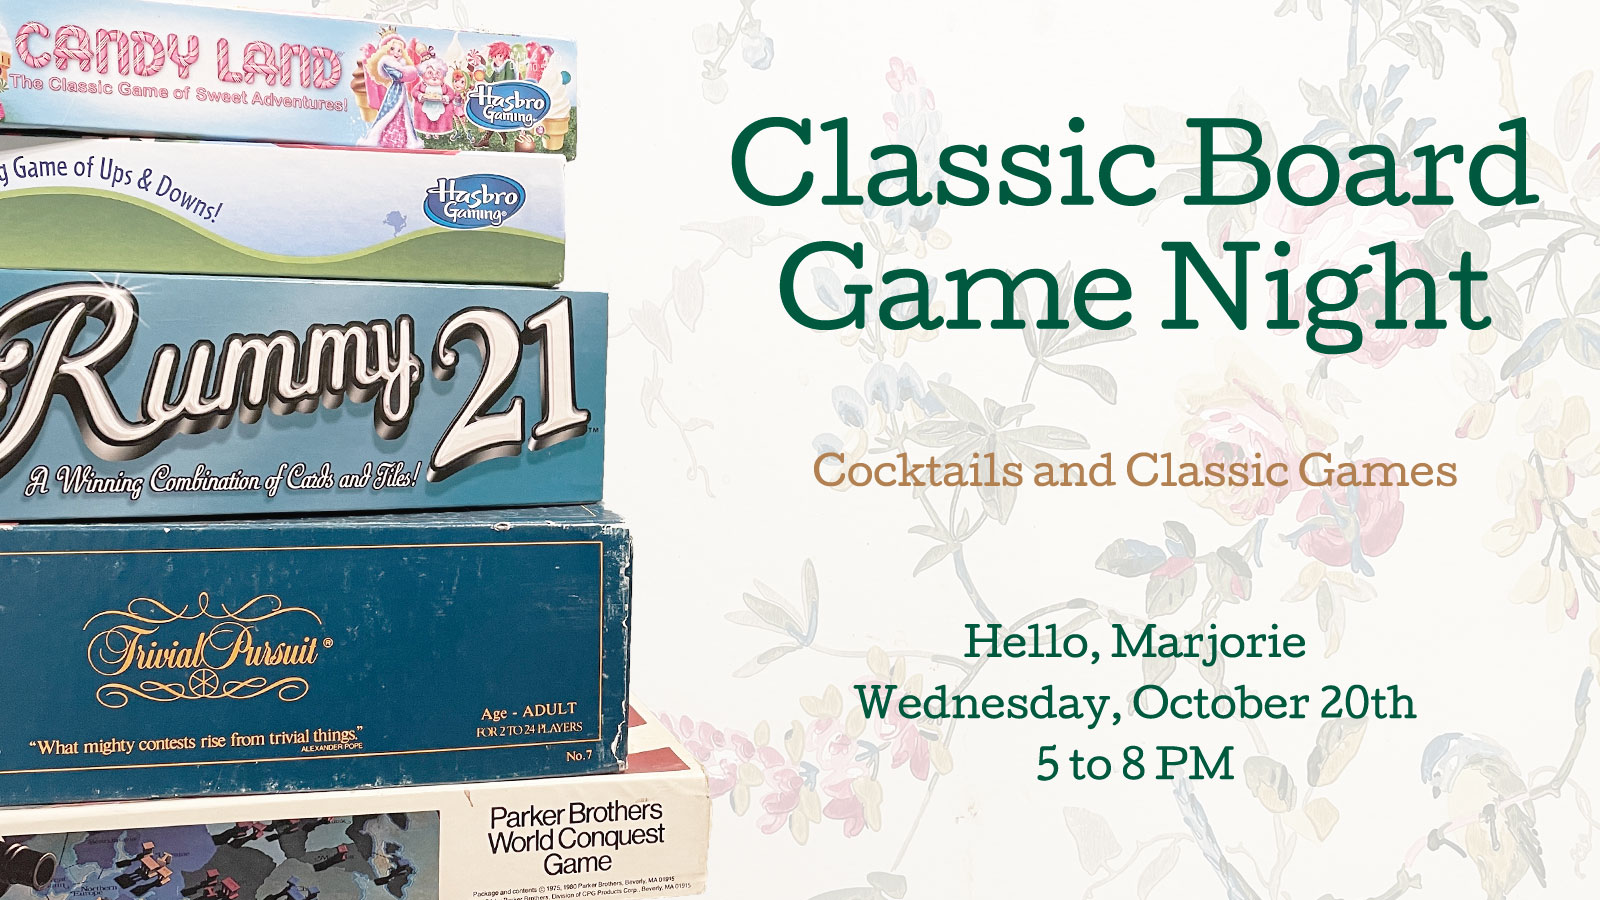 Classic Board Game Night at Hello Marjorie Header Image with Games and Info